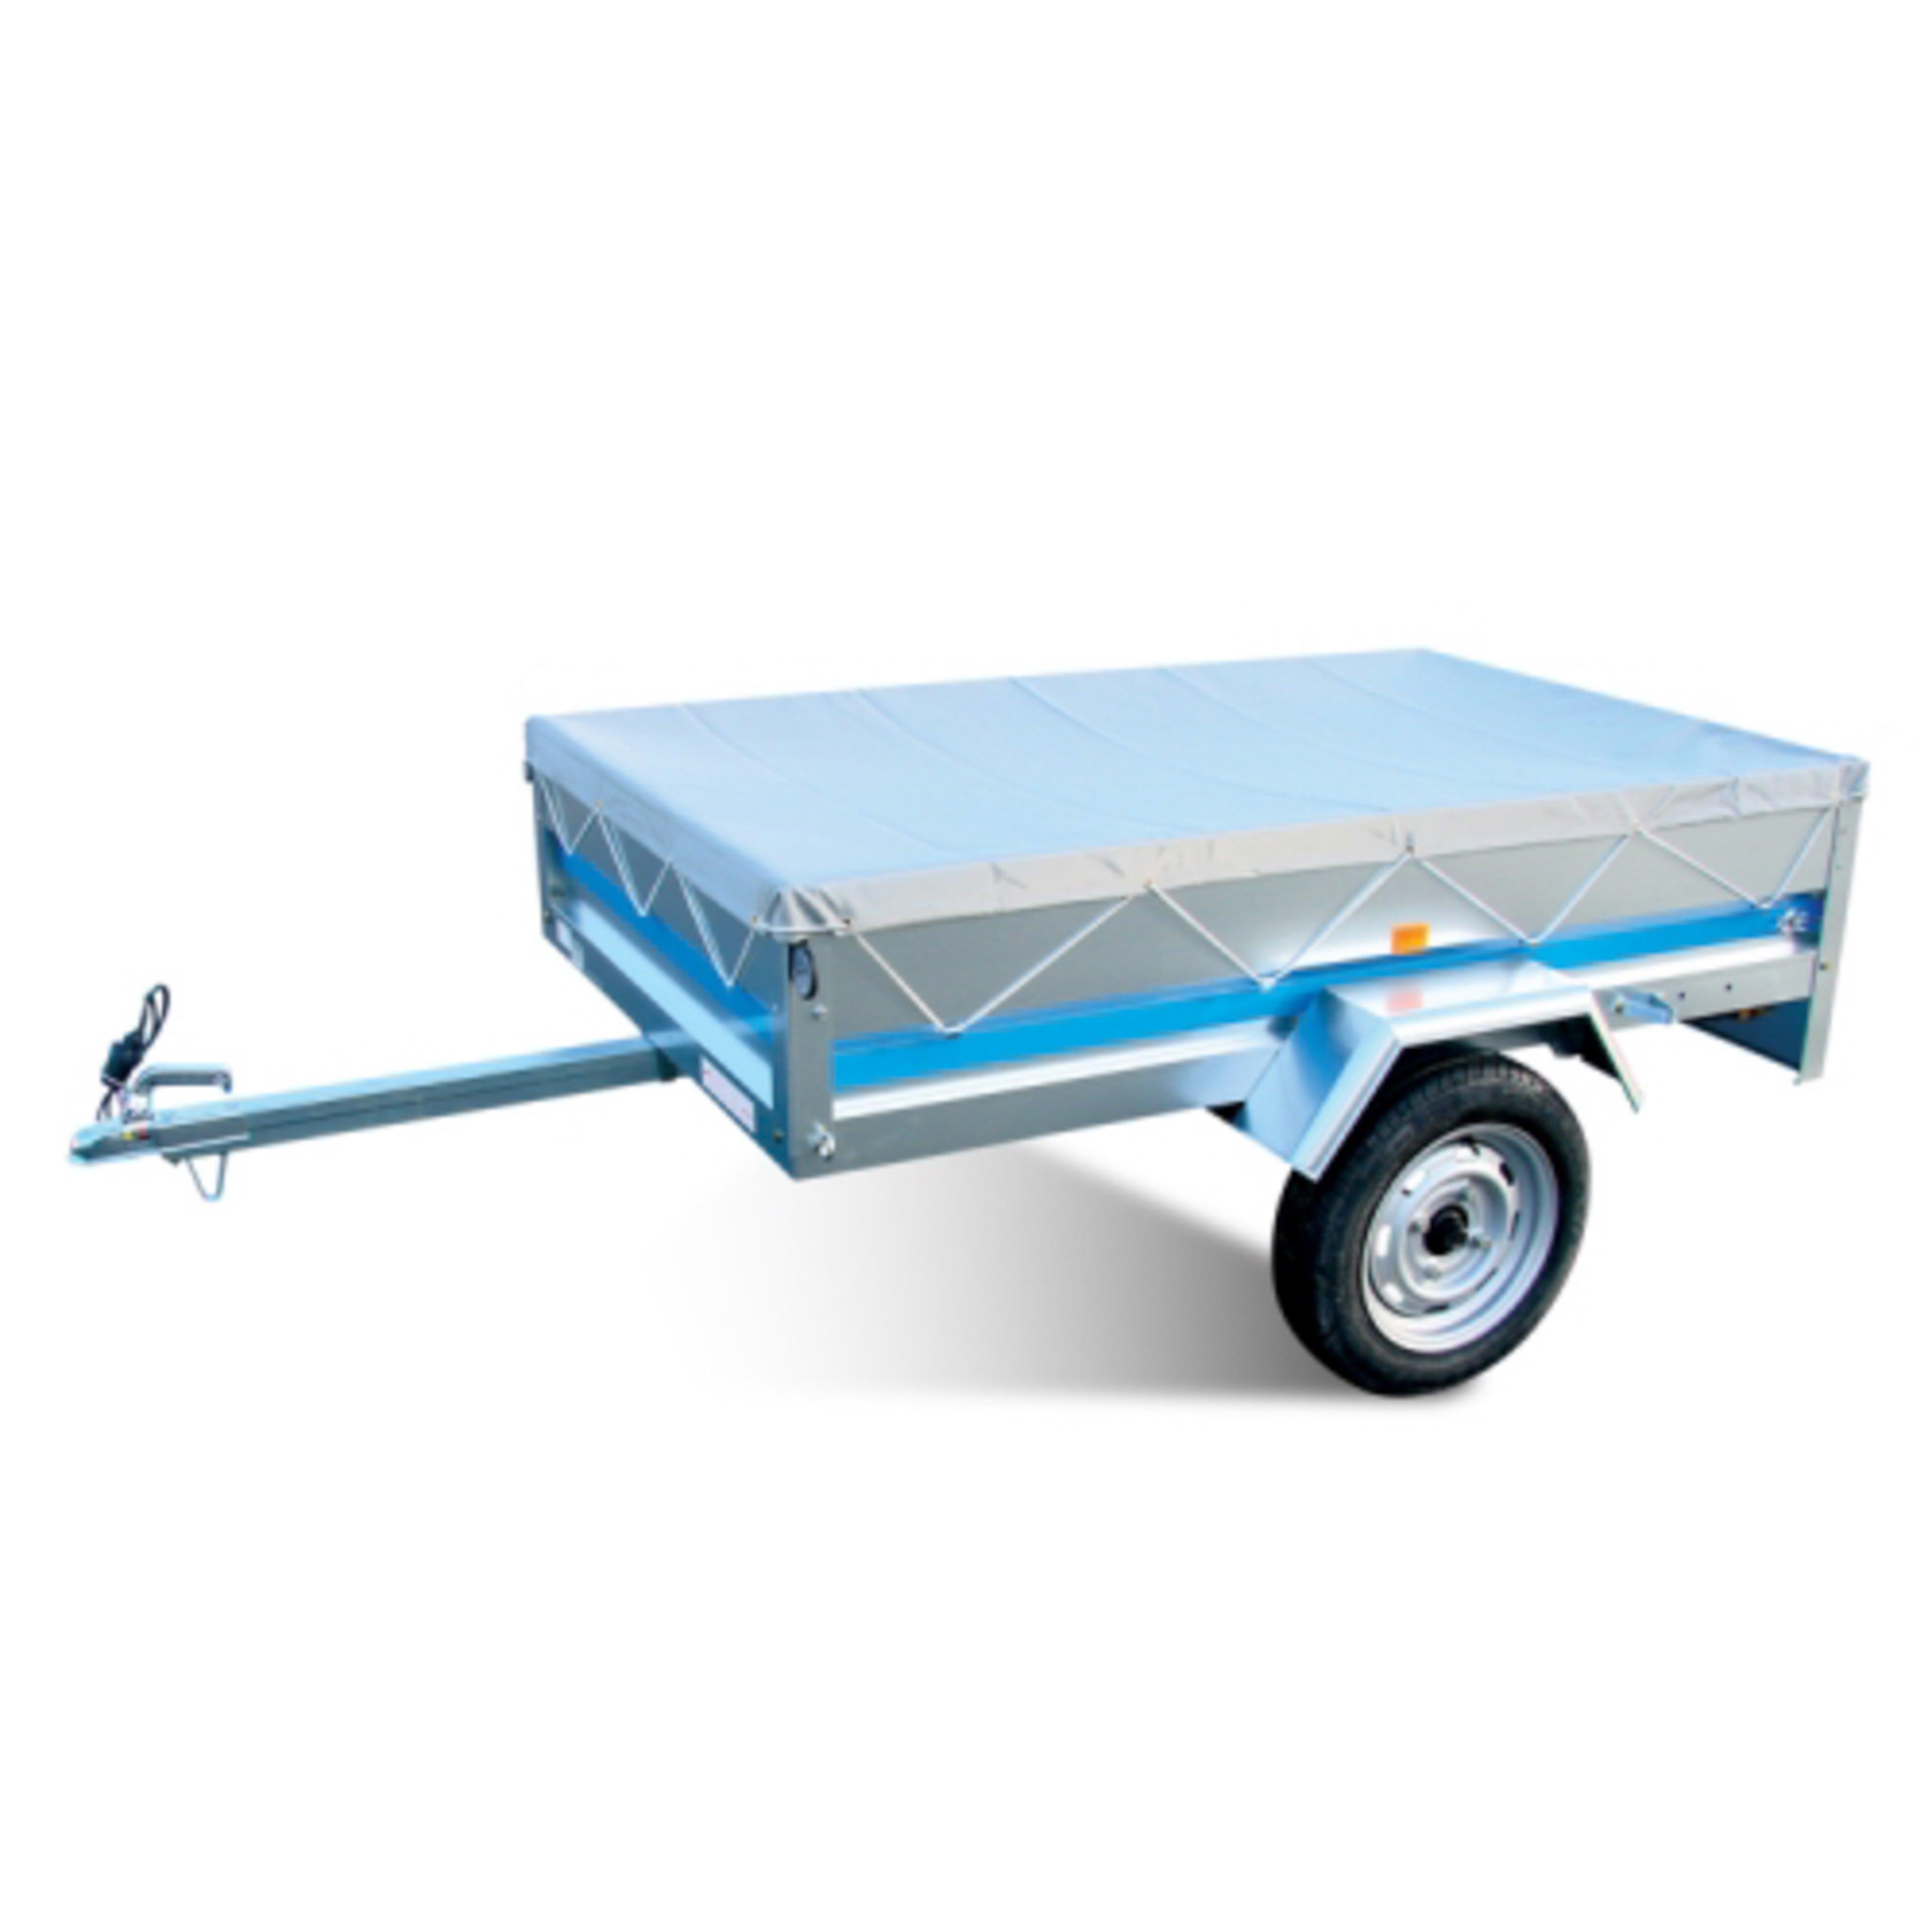 Maypole MP68151 Trailer Flat Cover (Fits MP6815) Review